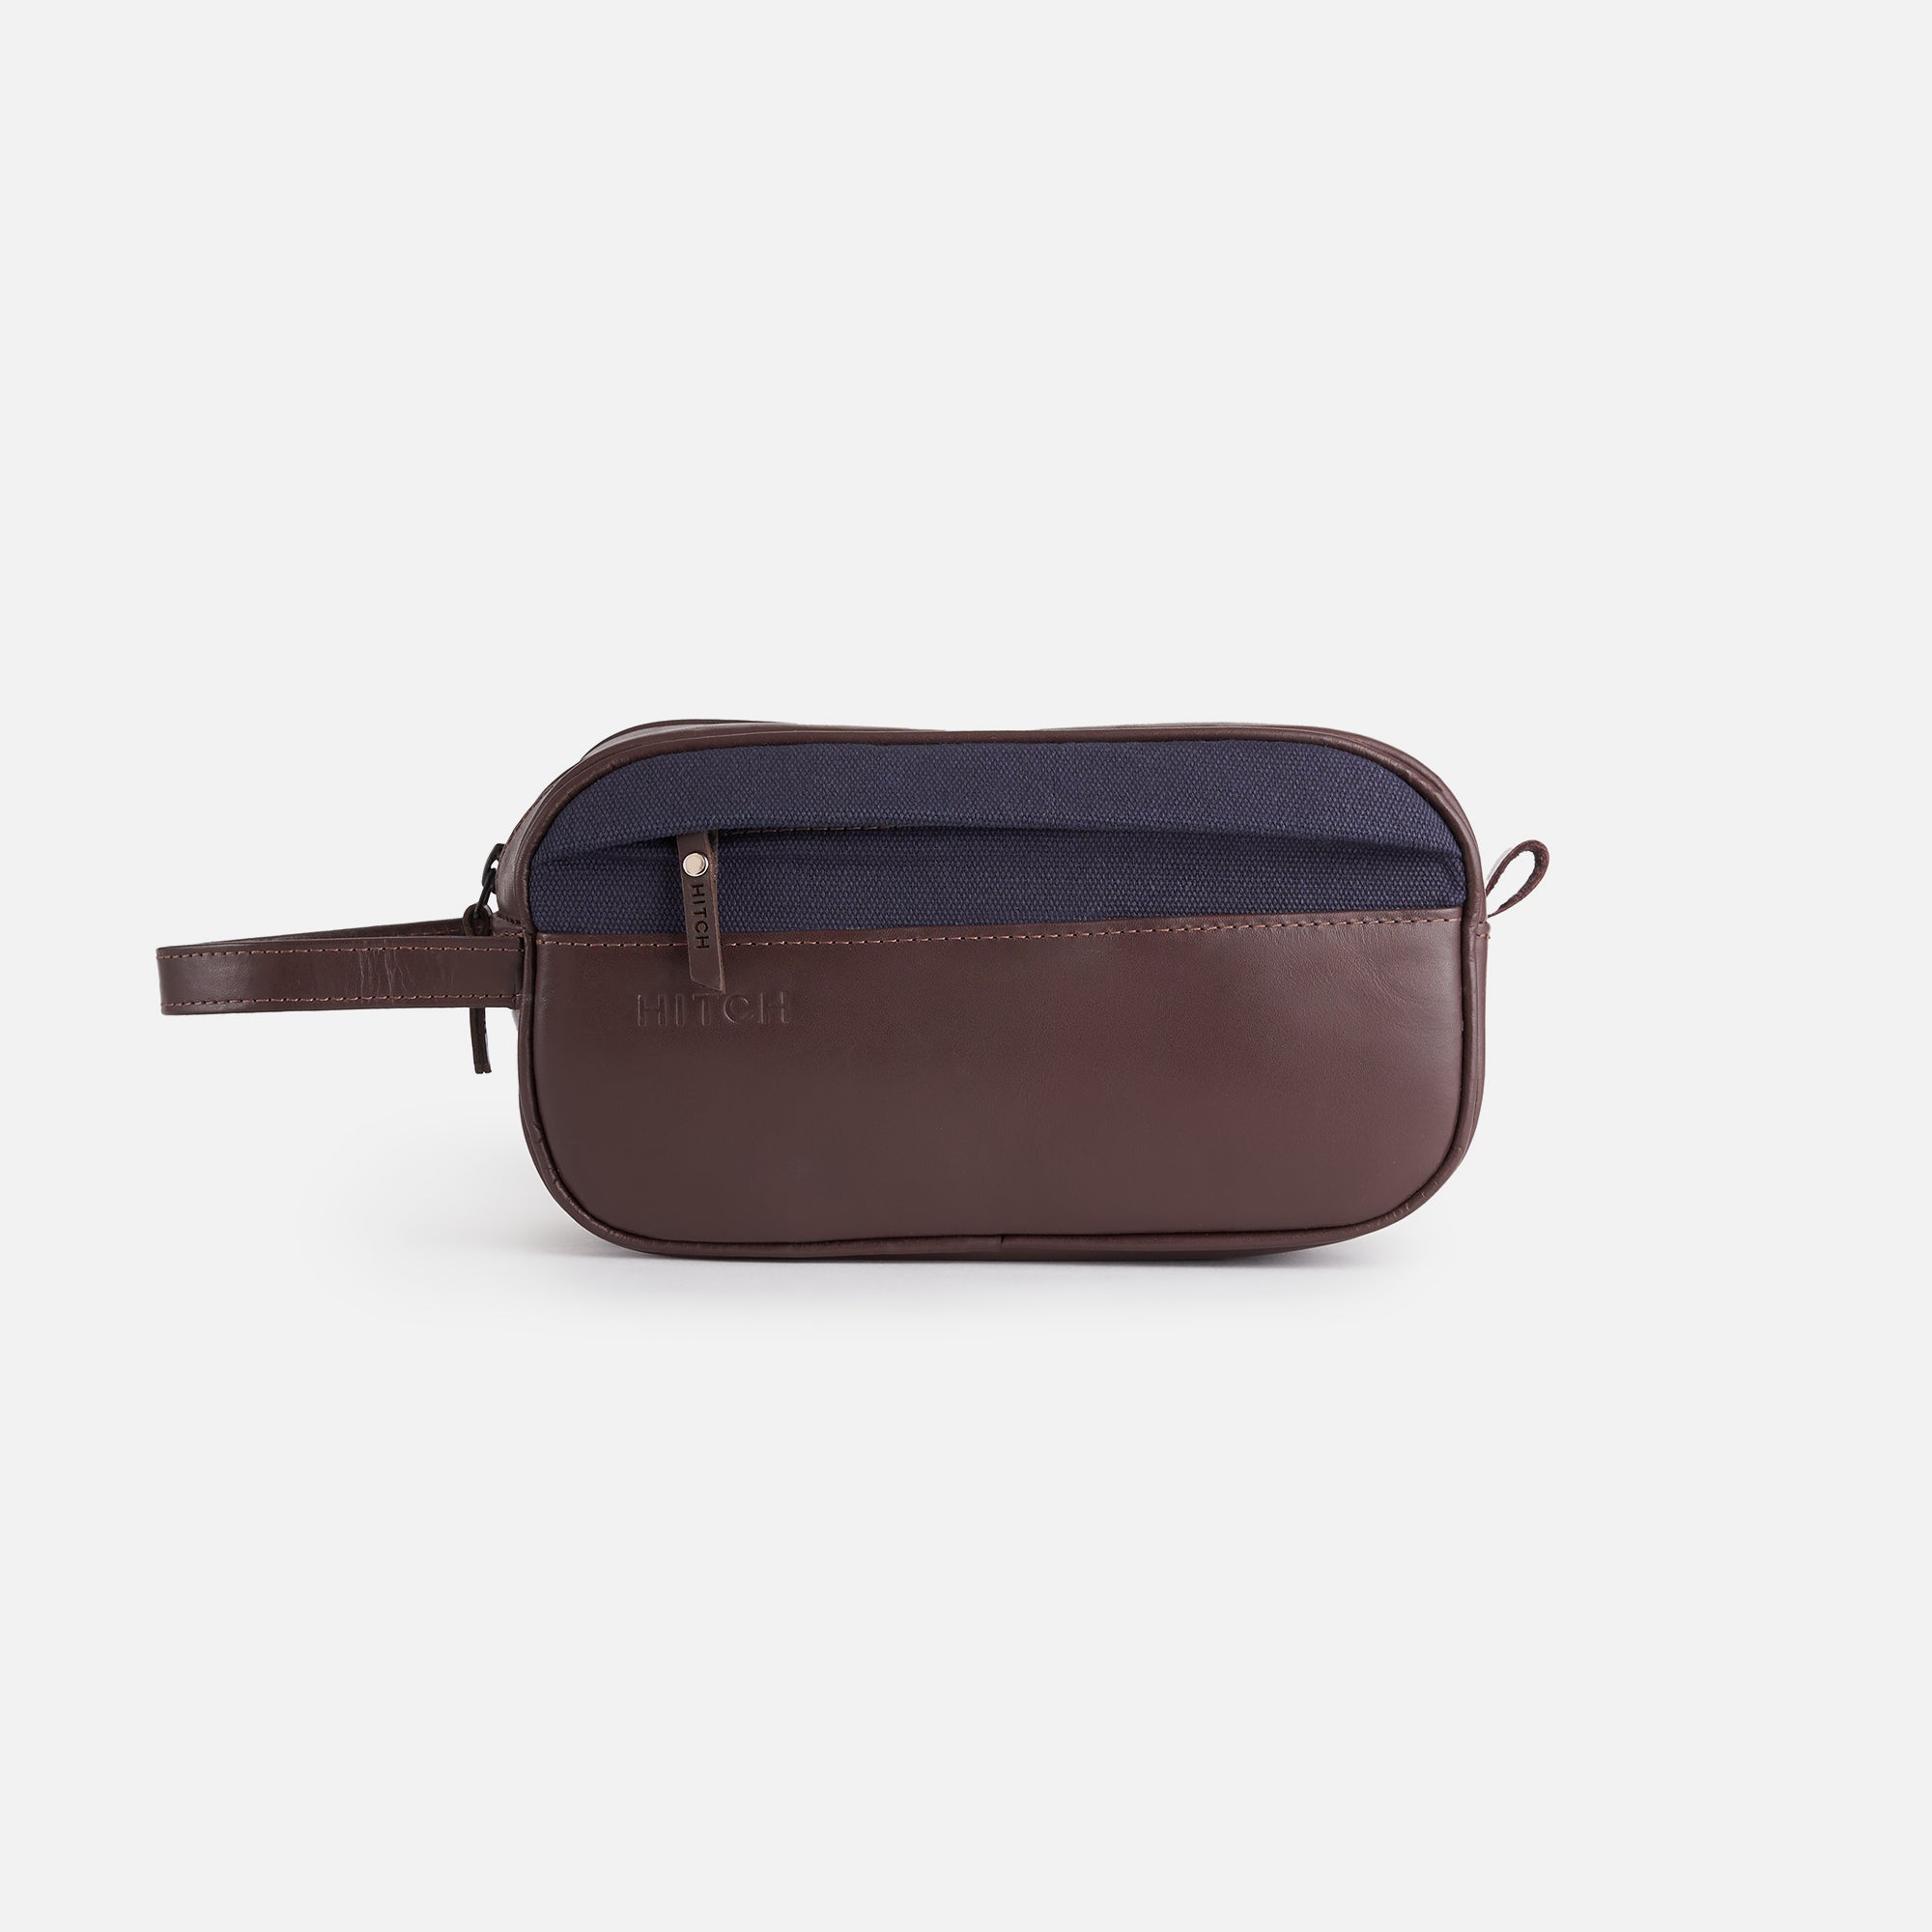 Designer brown leather Dopp kit with navy fabric detail, embossed HITCH, on white background.